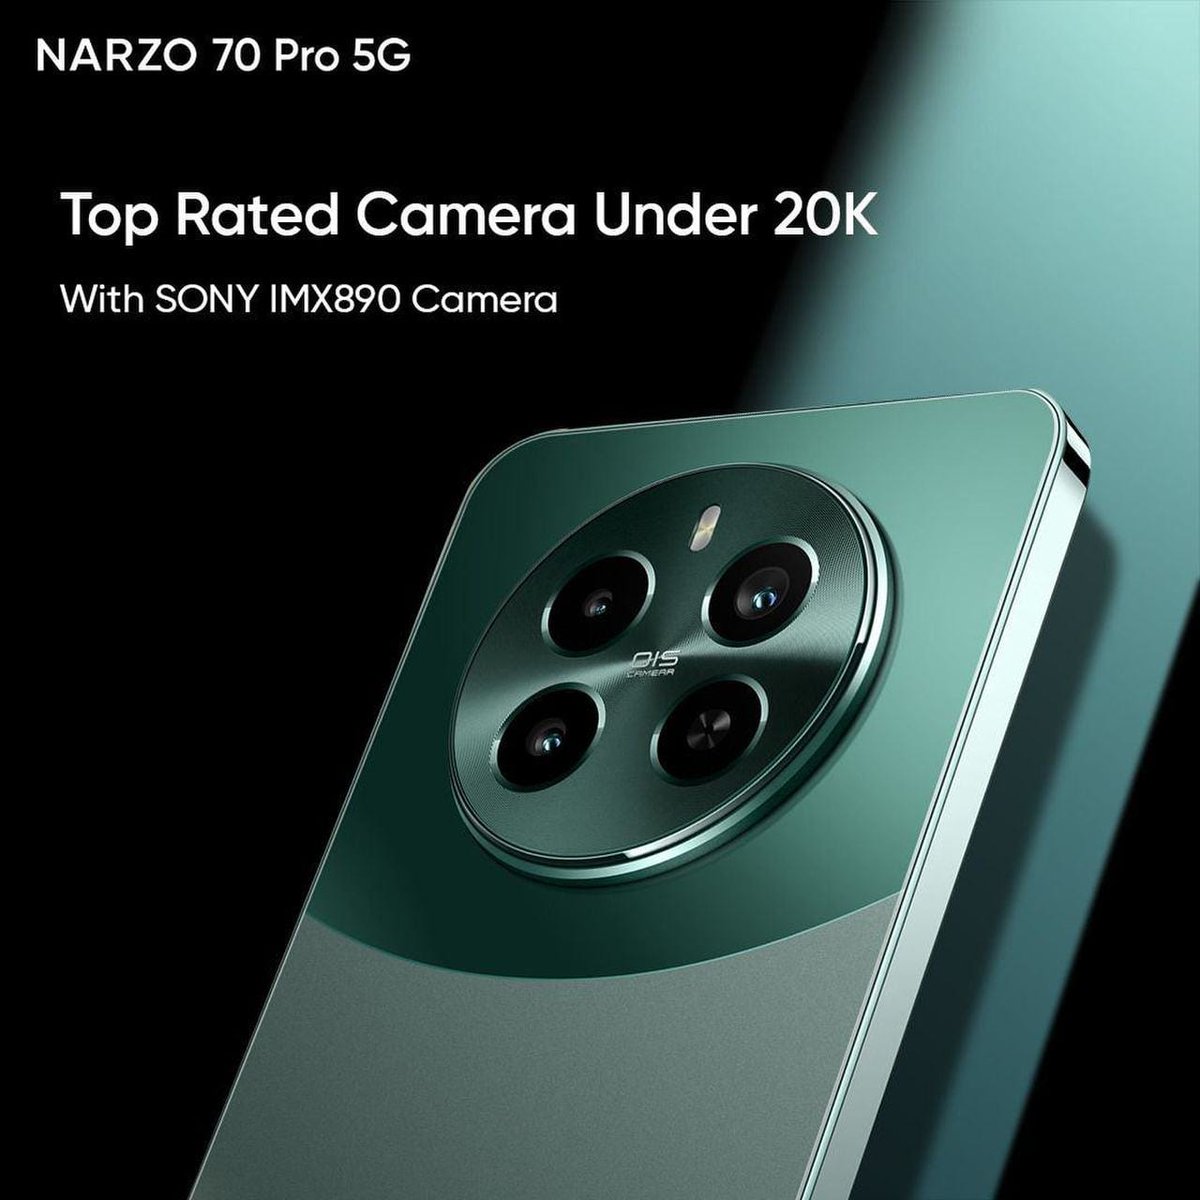 Say goodbye to blurry photos and hello to crisp, clear images with up to 3000 off on the #NARZO70Pro5G's top-rated camera! 📸 The Sony IMX 890 sensor ensures precision in every detail.